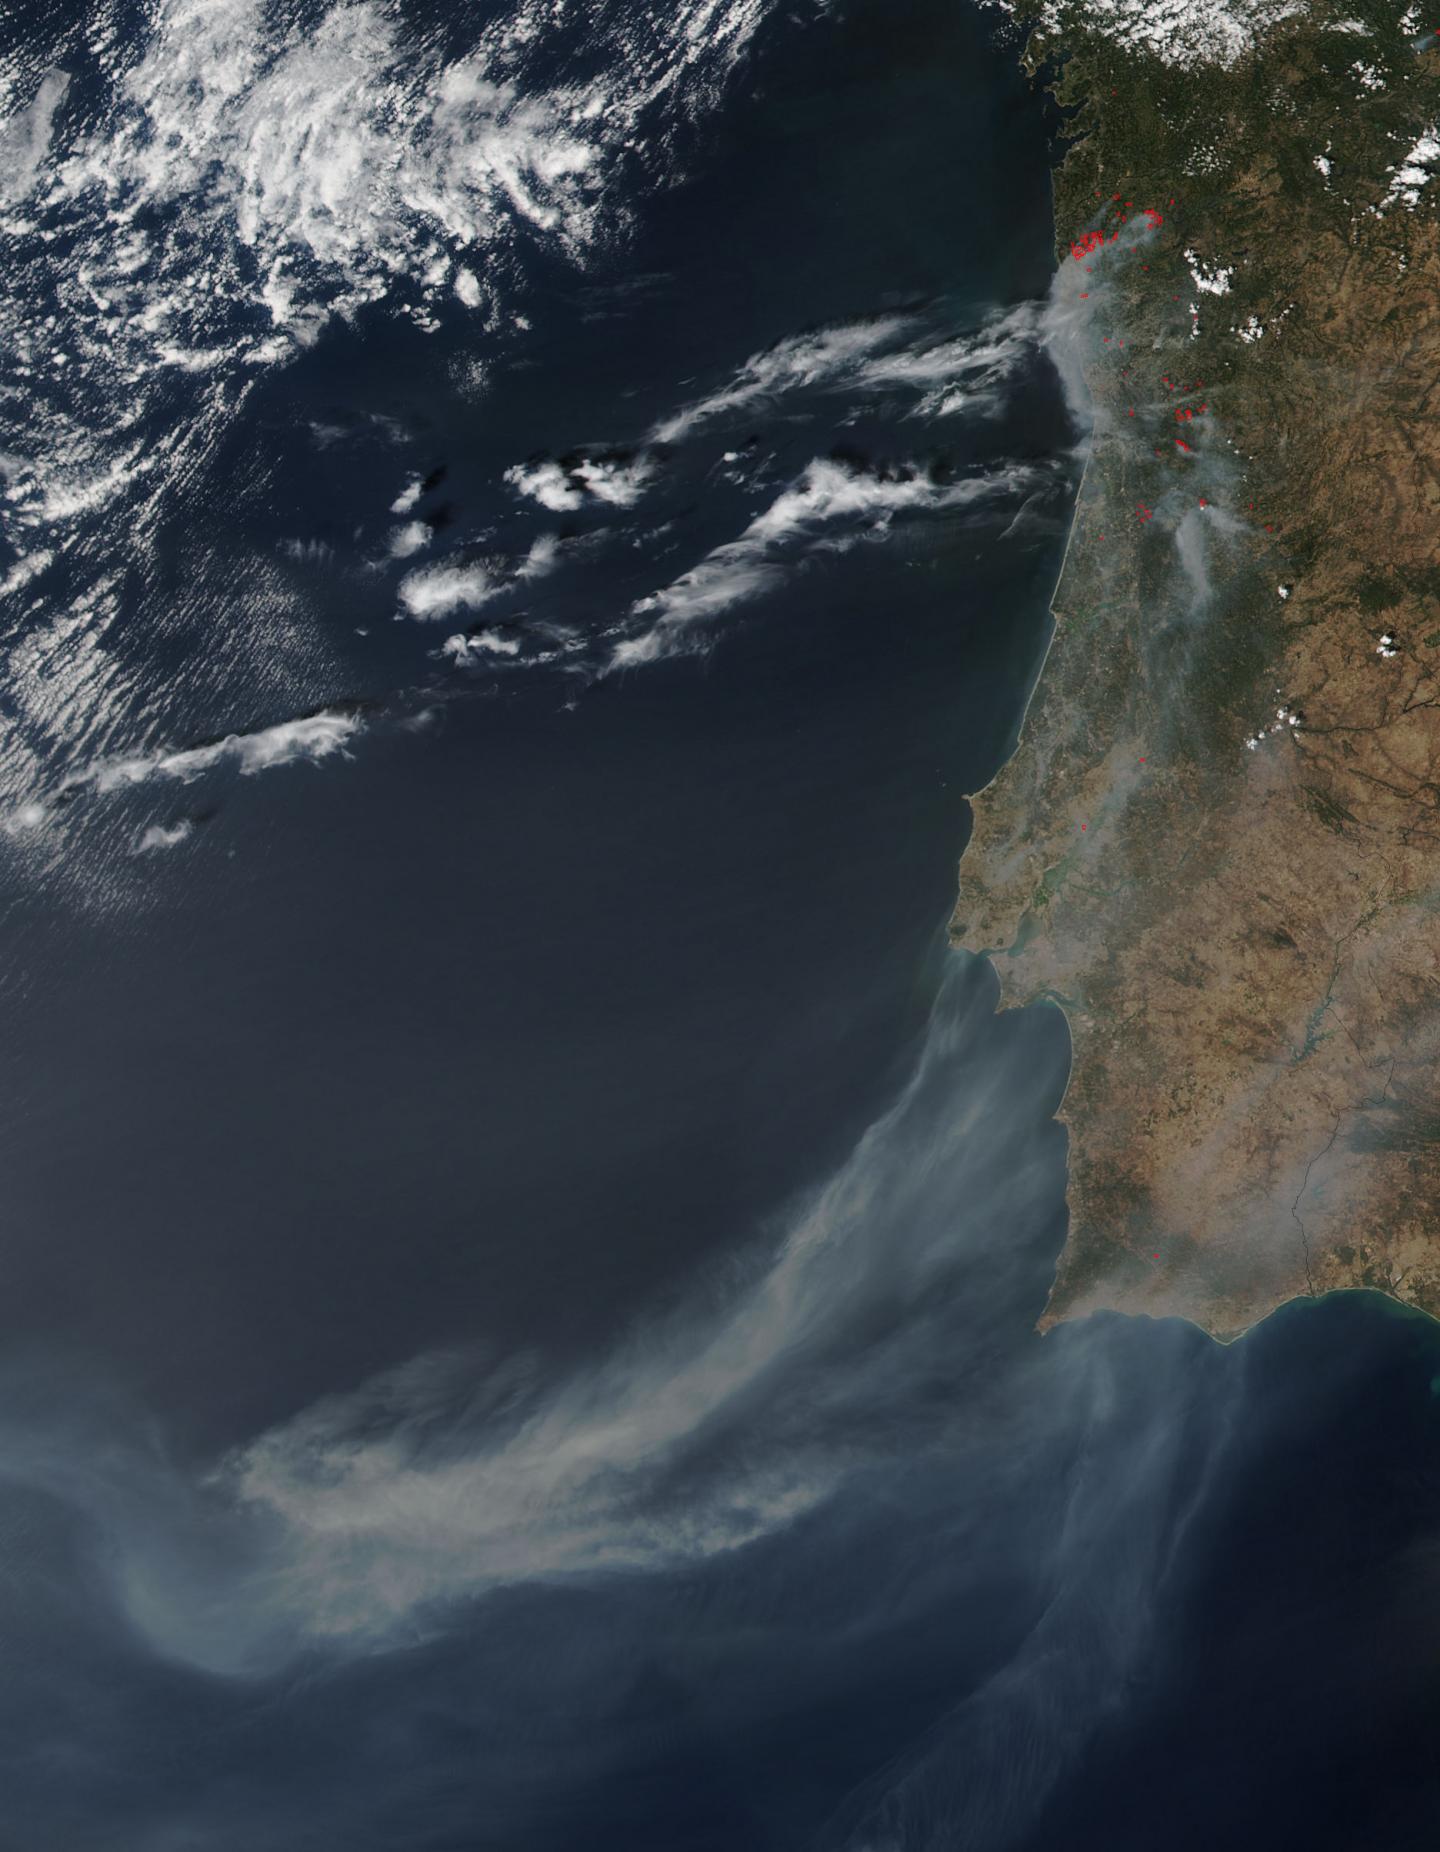 Portugal's Madeira Islands and Mainland Fires